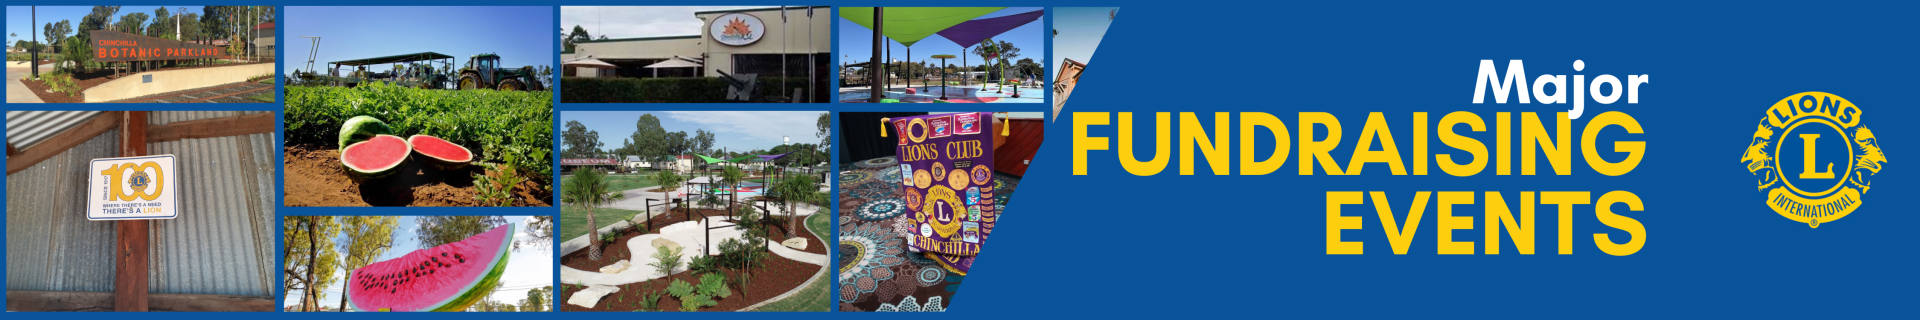 Lions Club Chinchilla  Major Fundraising Events Banner